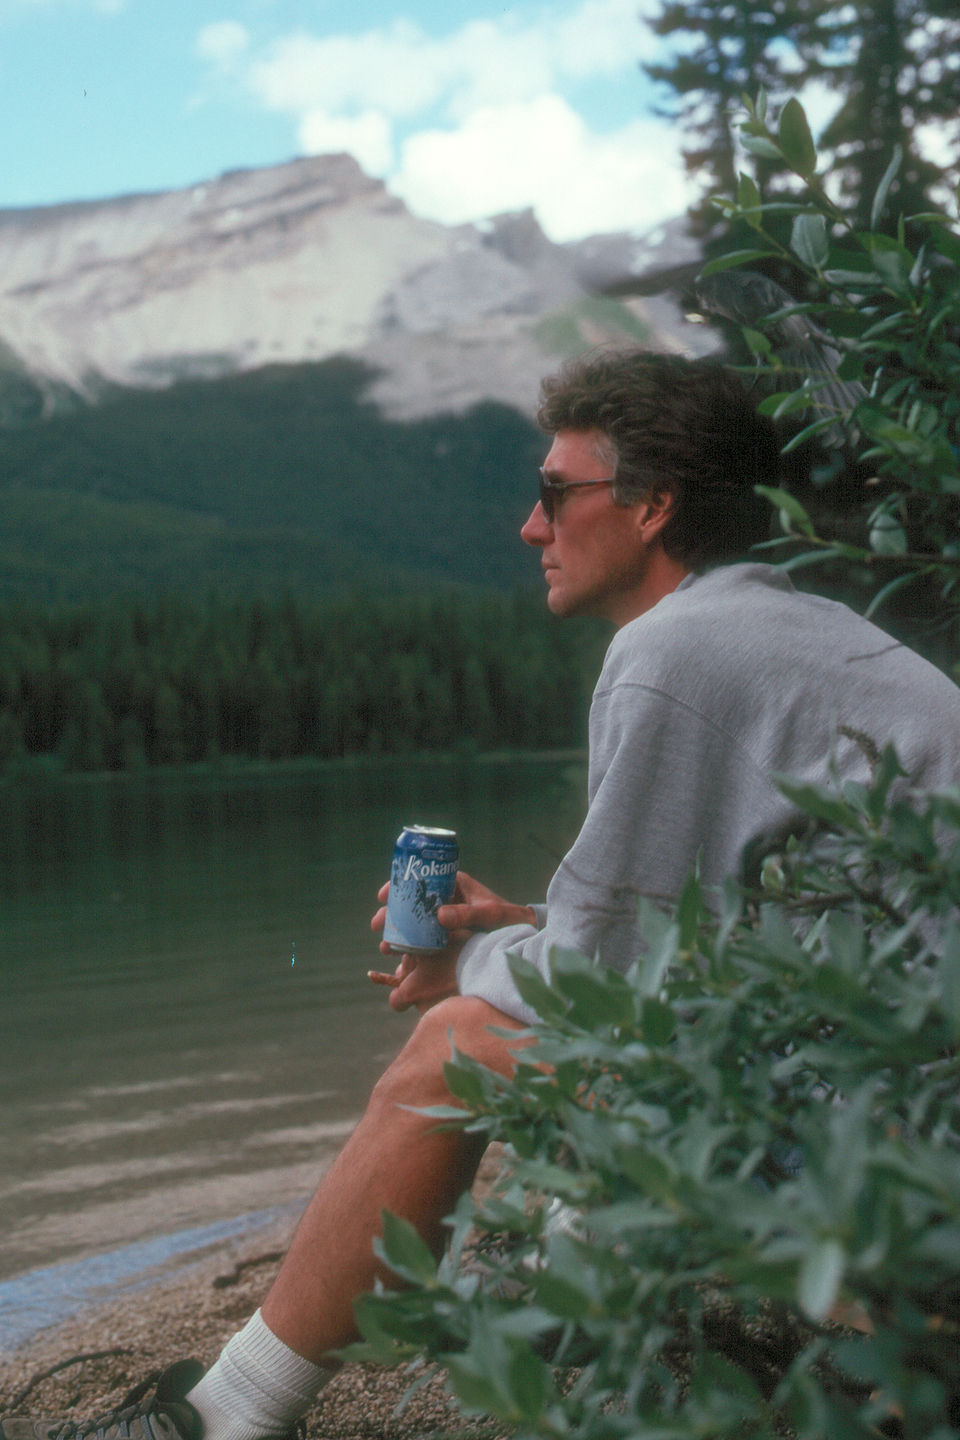 Pensive Herb and beer on Maligne Lake